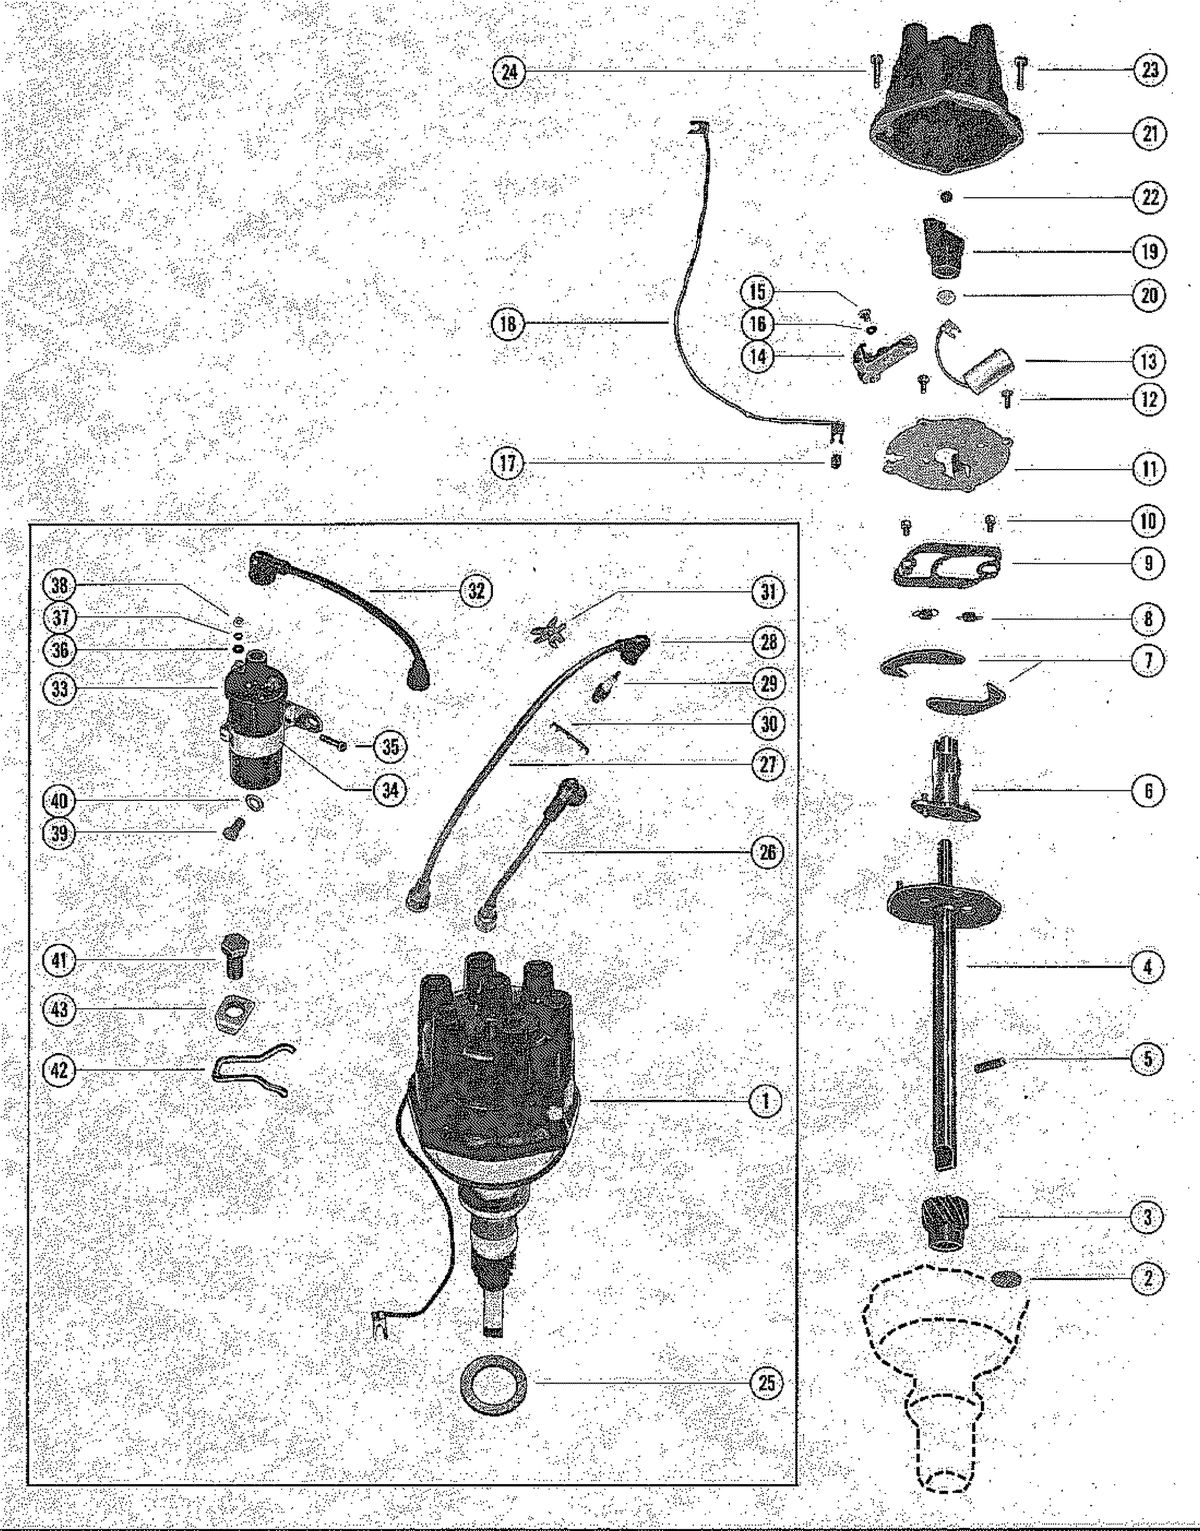 MERCRUISER 165 ENGINE DISTRIBUTOR ASSEMBLY AND COIL